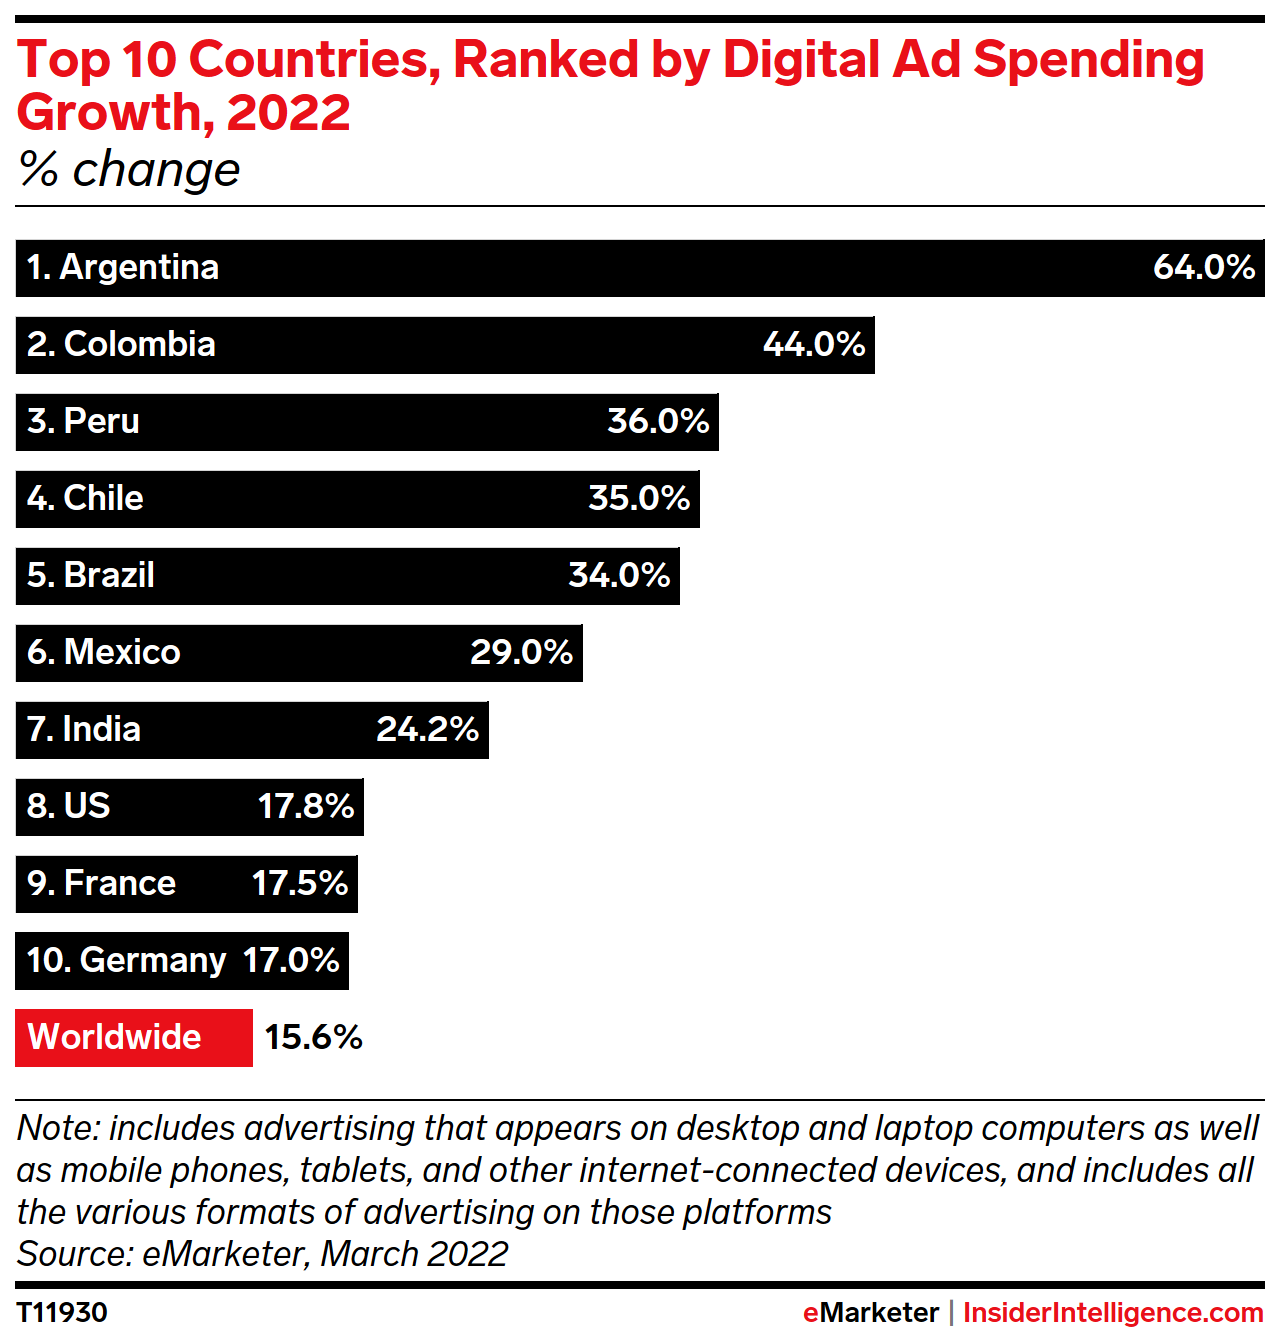 Top 10 Countries, Ranked by Digital Ad Spending Growth, 2022 (% change)